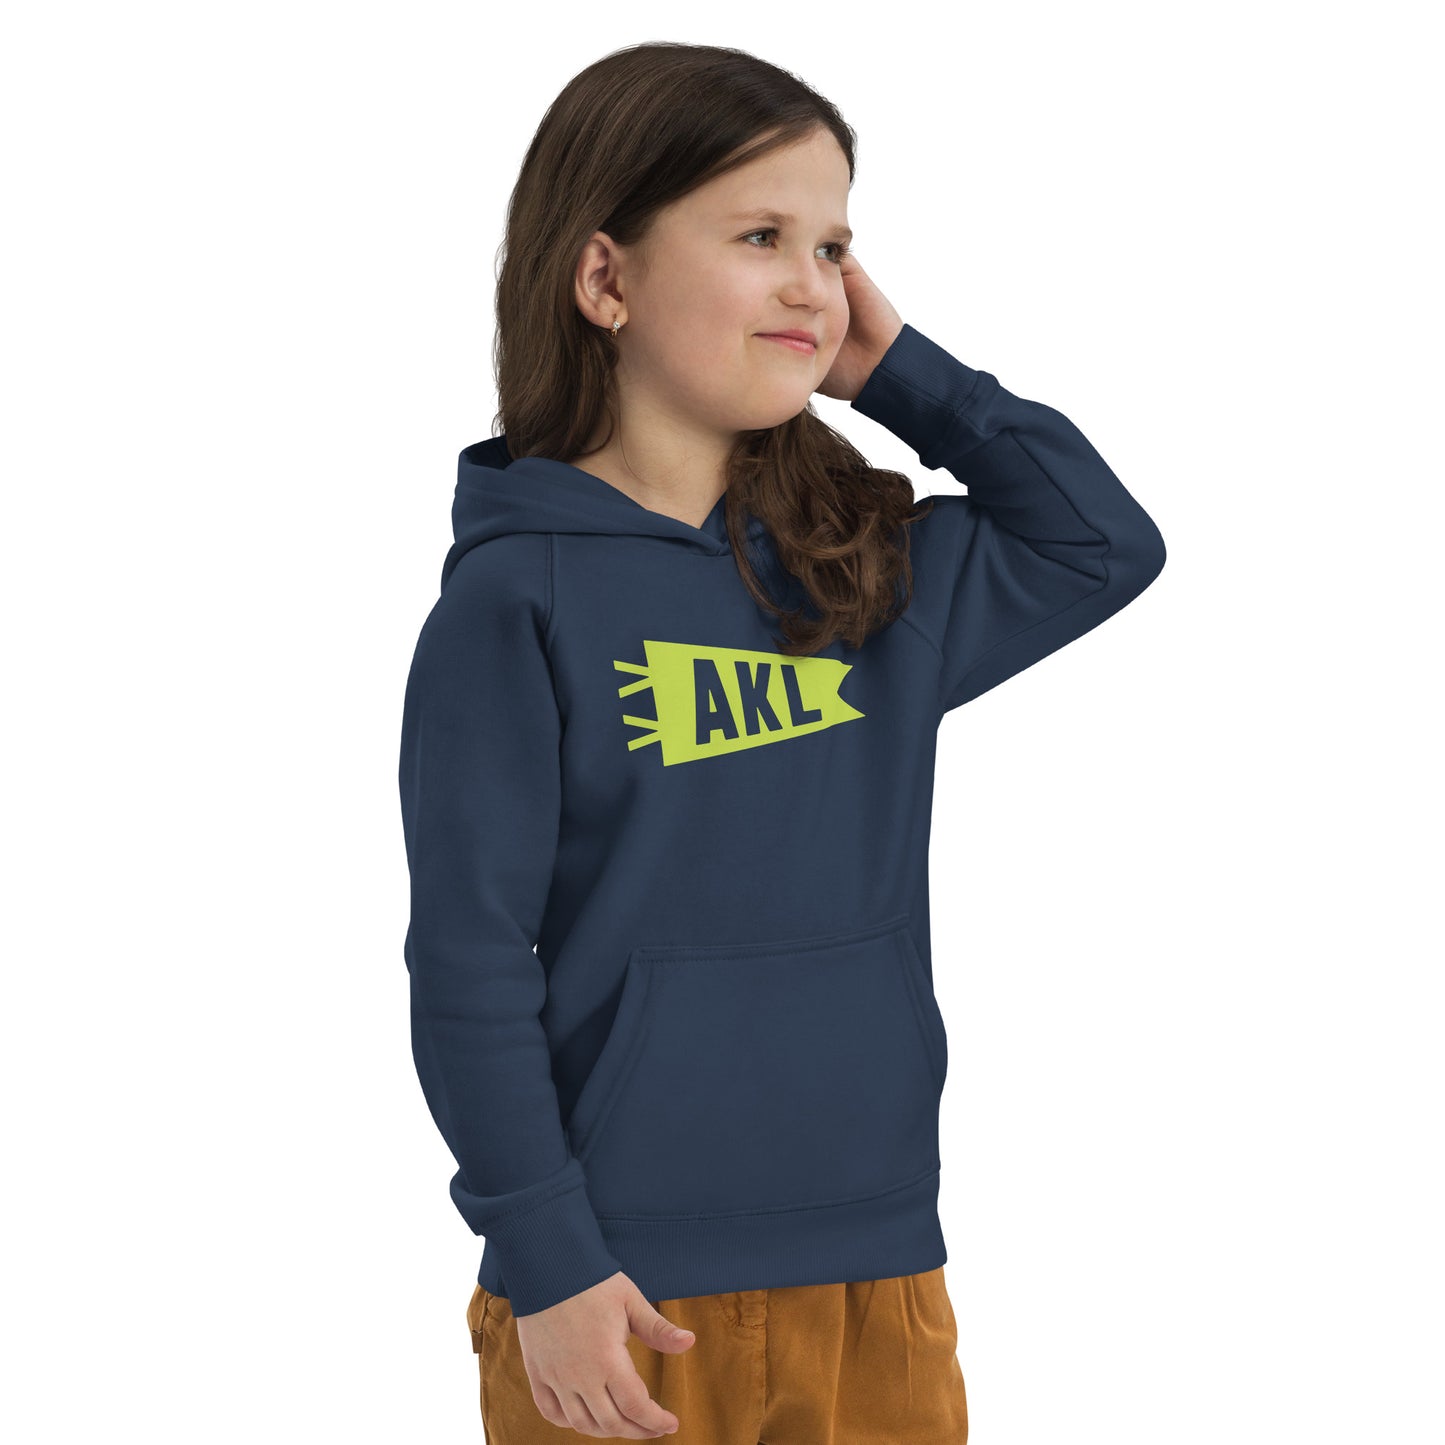 Kid's Sustainable Hoodie - Green Graphic • AKL Auckland • YHM Designs - Image 06